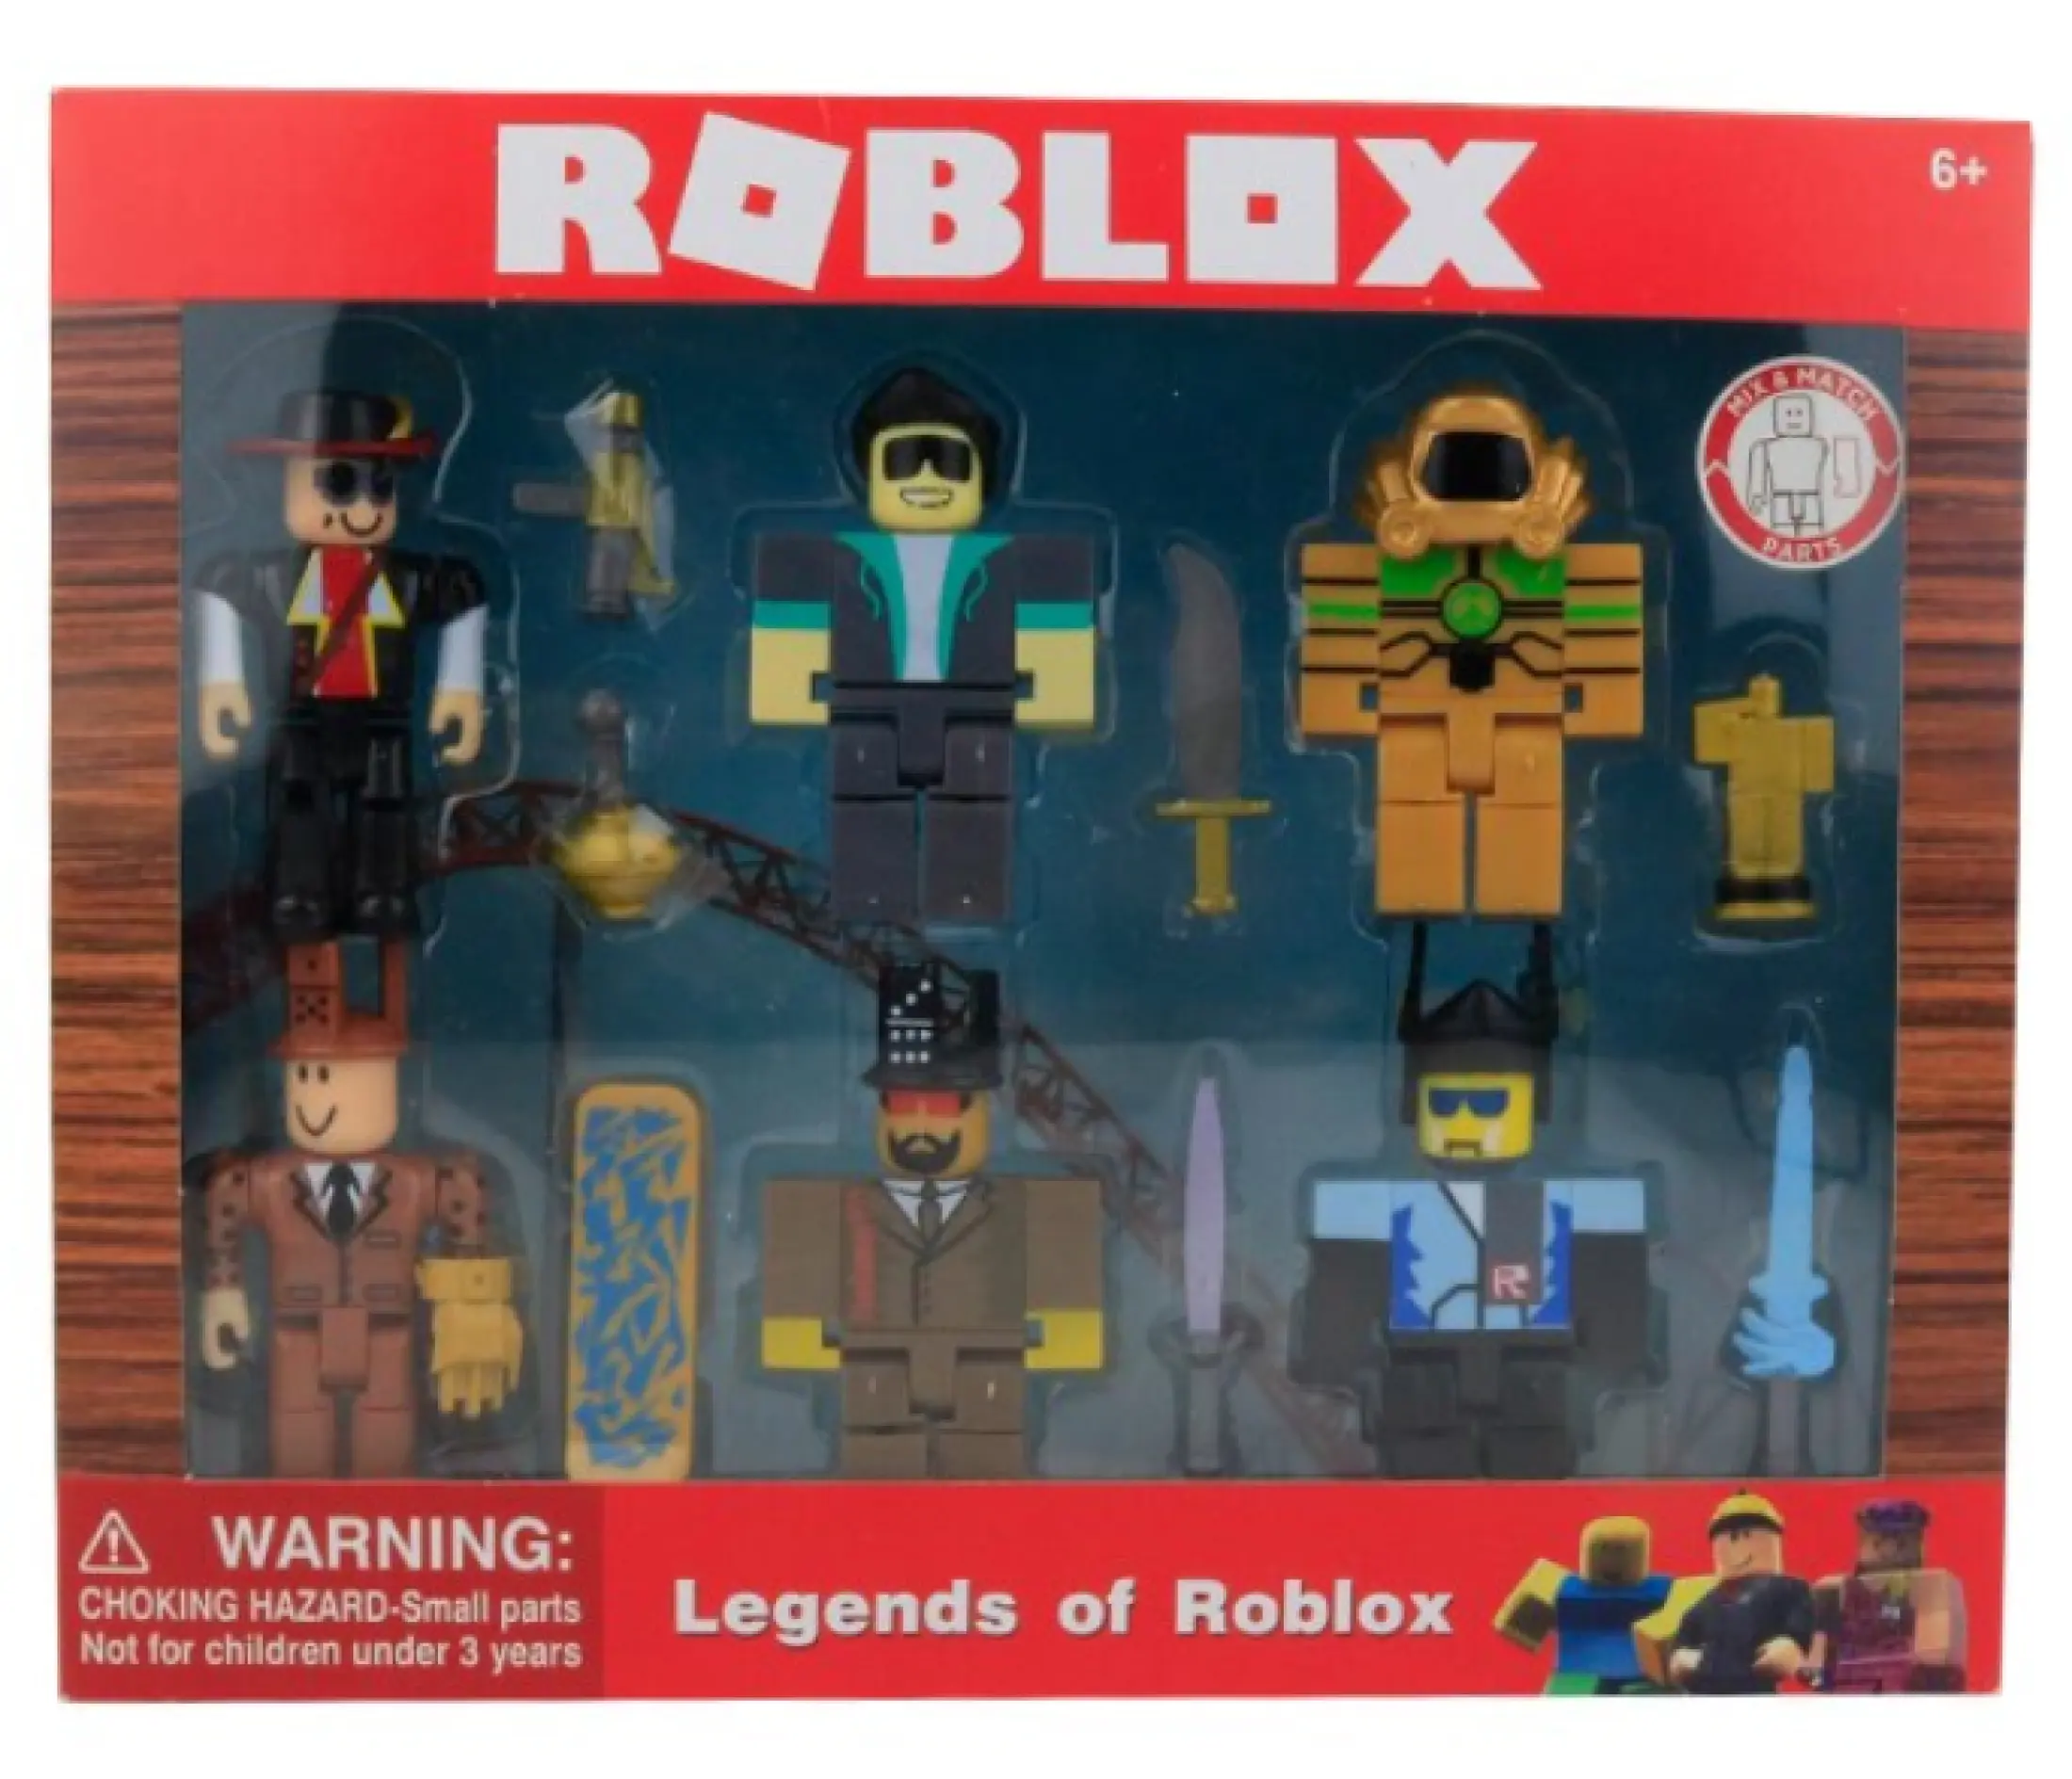 Birthday Gift Roblox Toys For Boys Legends Of Roblox Toys Figures Full Set No Code And Neverland Lagoon Set Lazada Ph - how to make your own roblox toys